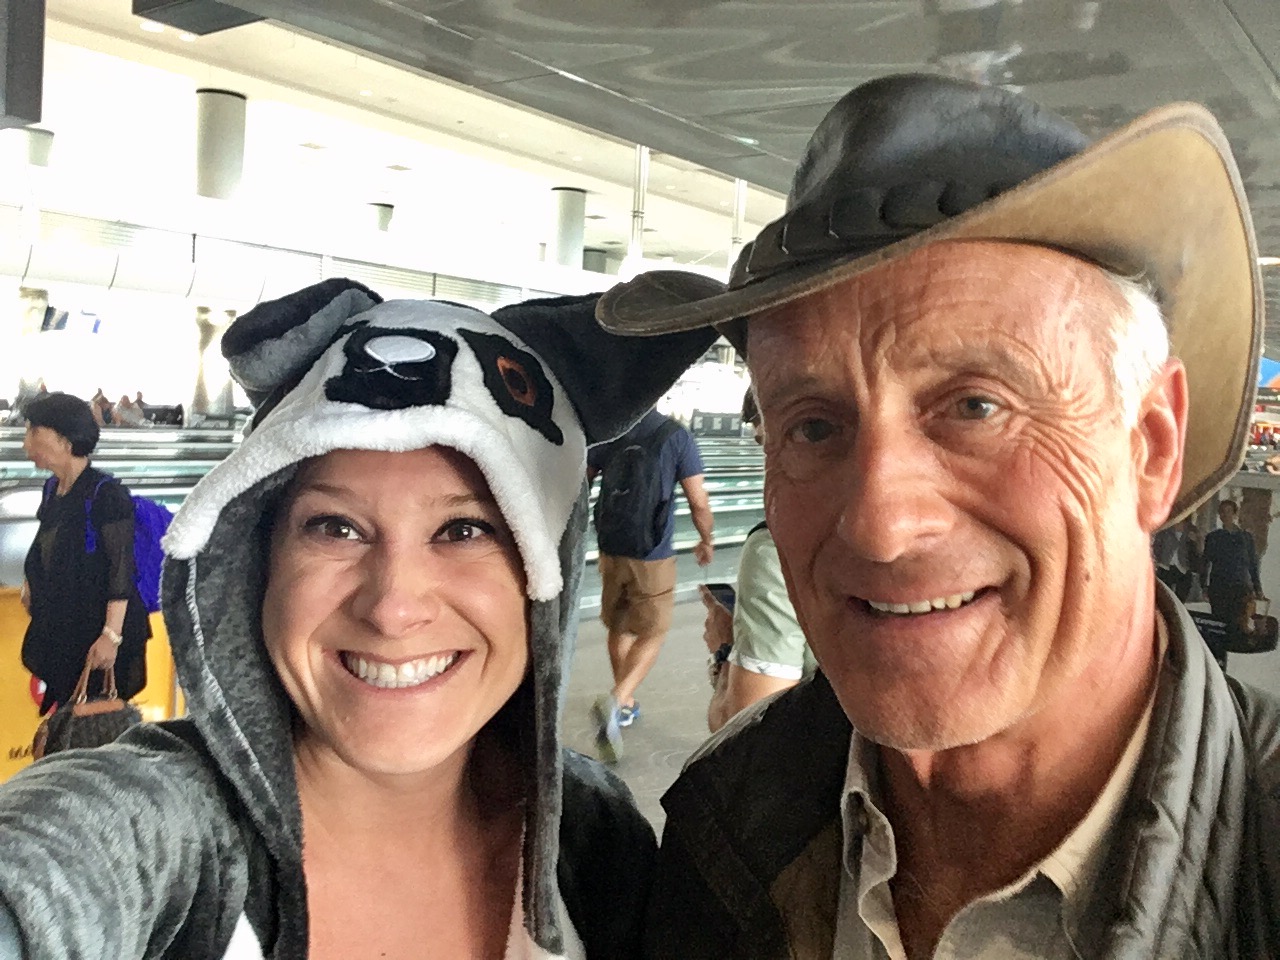 "Everyone started telling me Jack Hanna, the famous wildlife expert was on board. So I sent him a note in first class (thank you to the united flight attendant who delivered it!) and we met!"